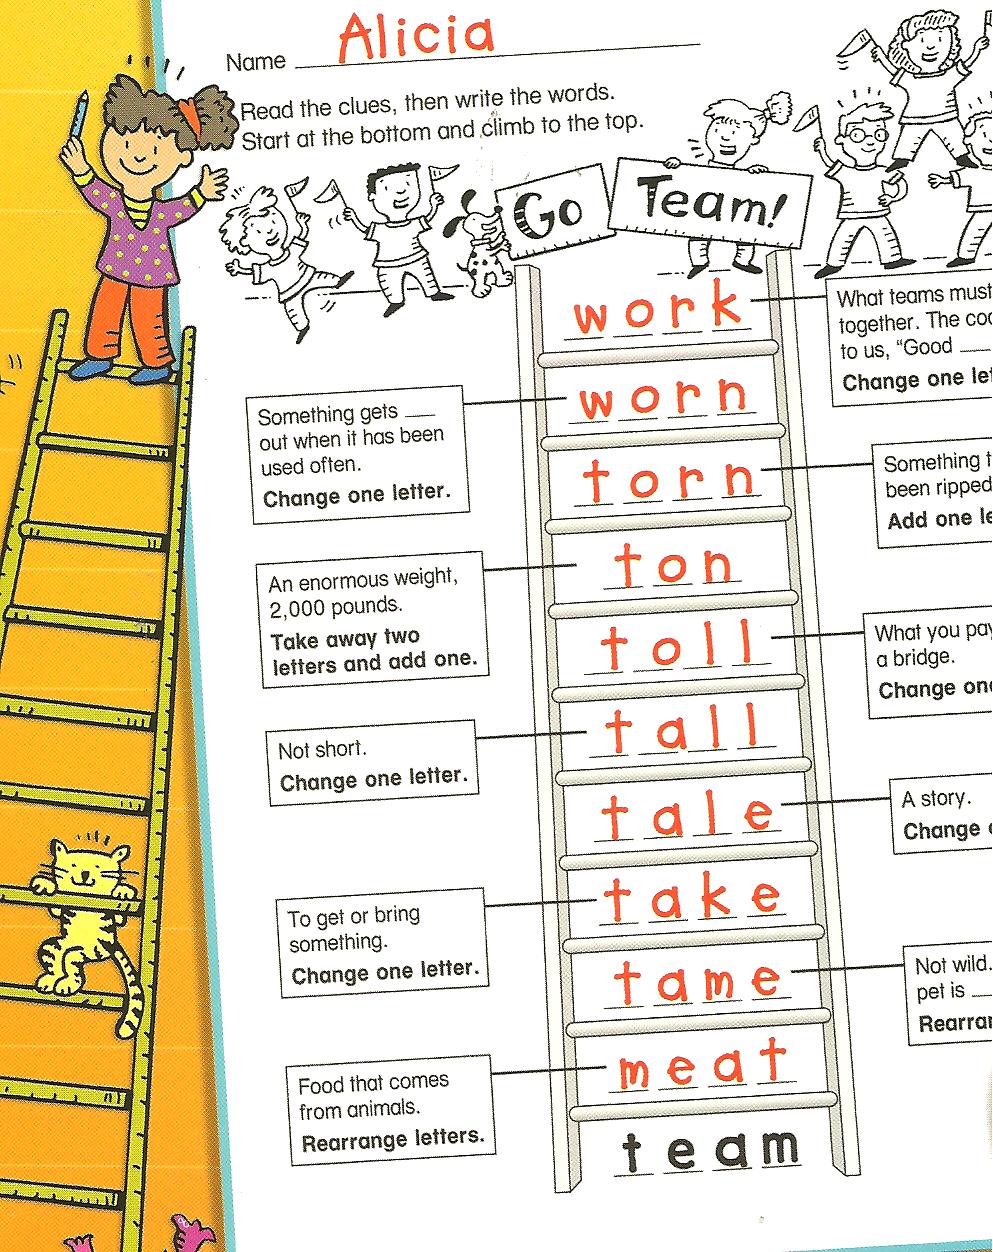 multisensory-monday-word-ladders-ladder-learning-services-llc